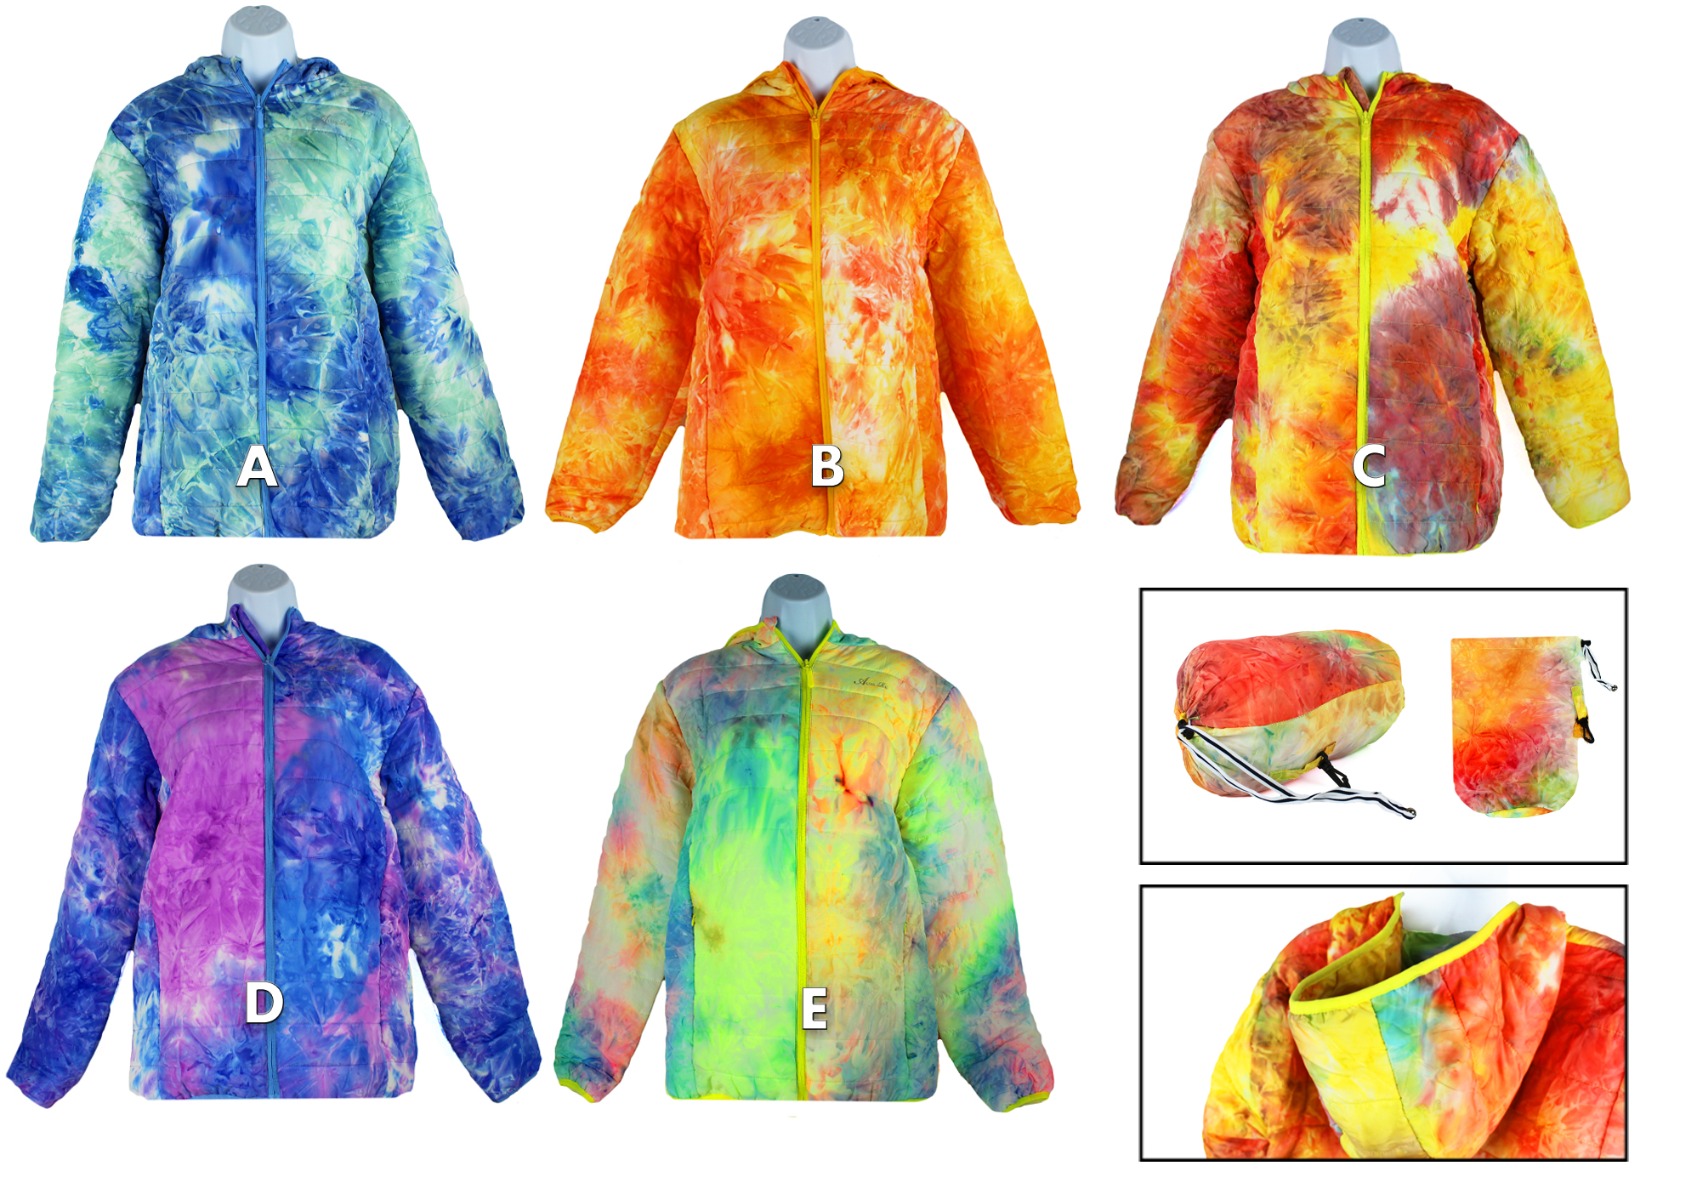 Kid's Packable Hooded Tie Dye JACKETs - Choose Your Color(s)